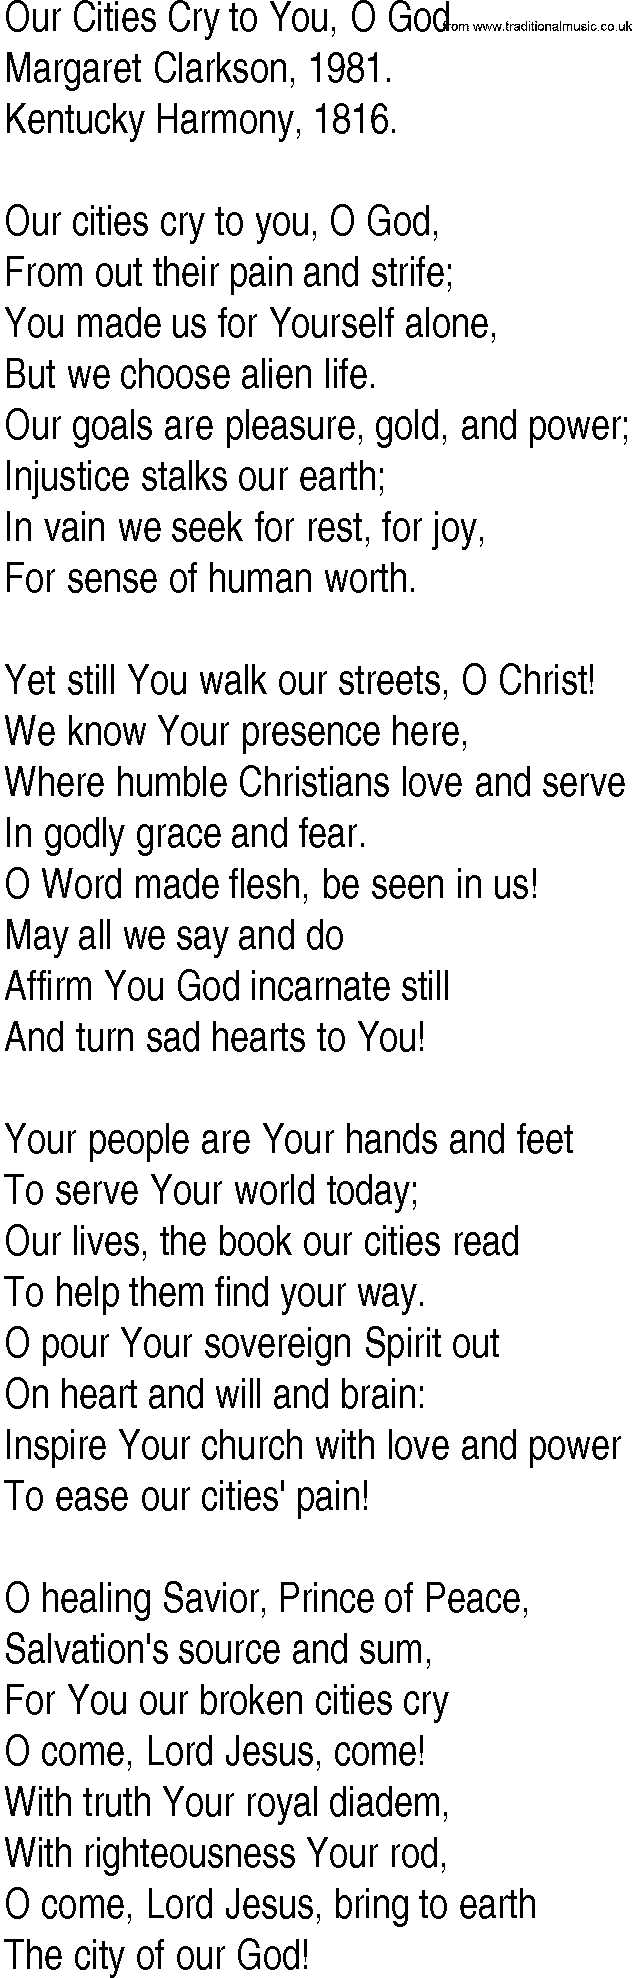 Hymn and Gospel Song: Our Cities Cry to You, O God by Margaret Clarkson lyrics